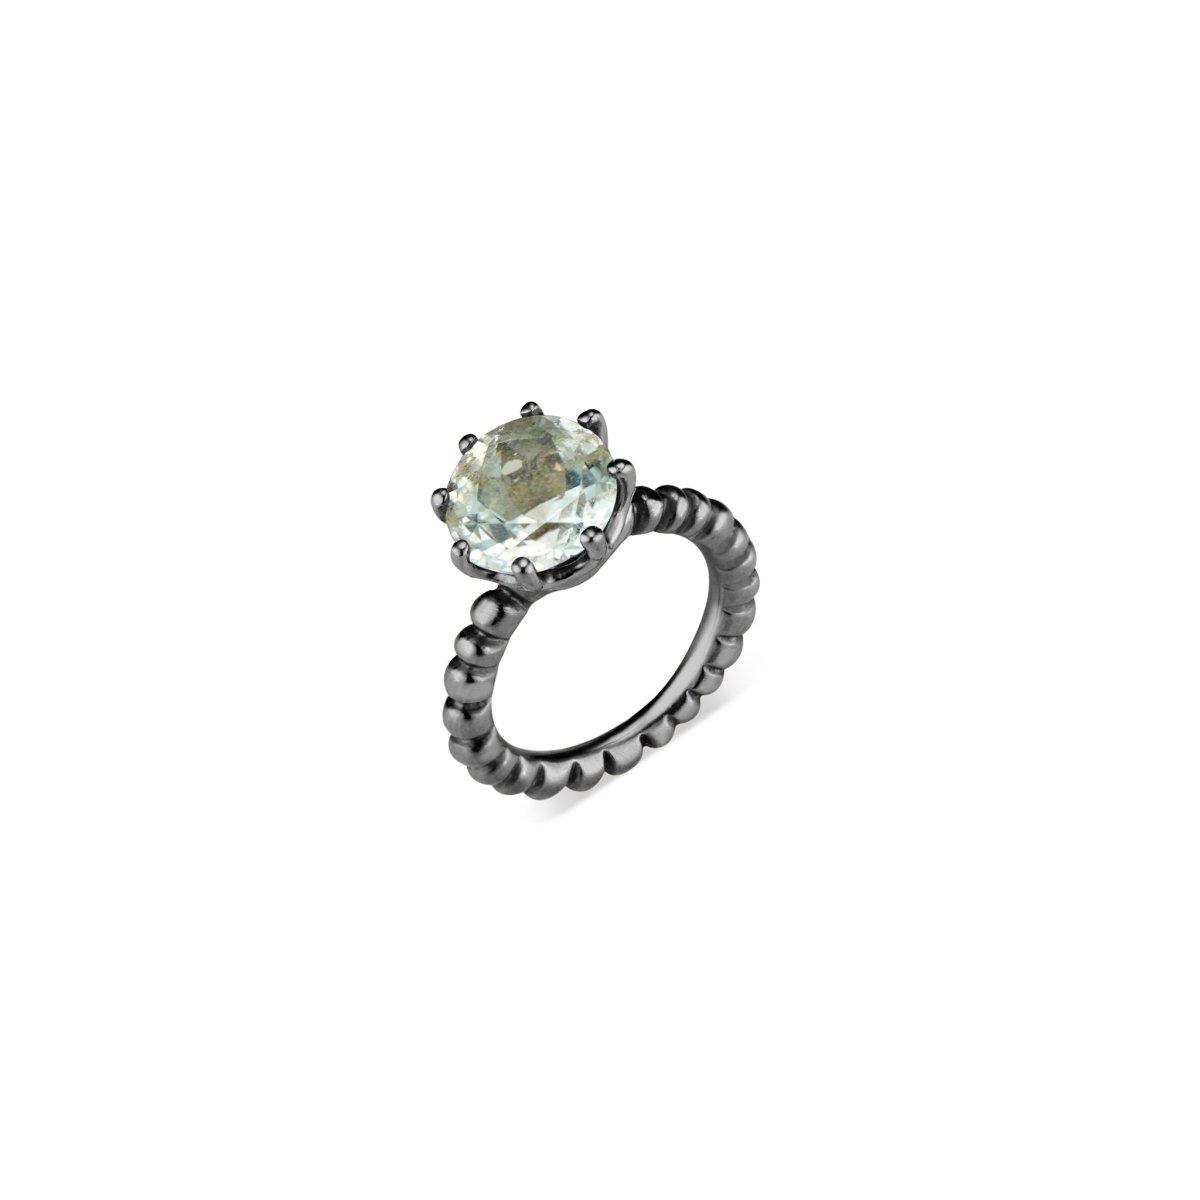 Blue Topaz Crown Ring Sterling Silver - Nataly Aponte